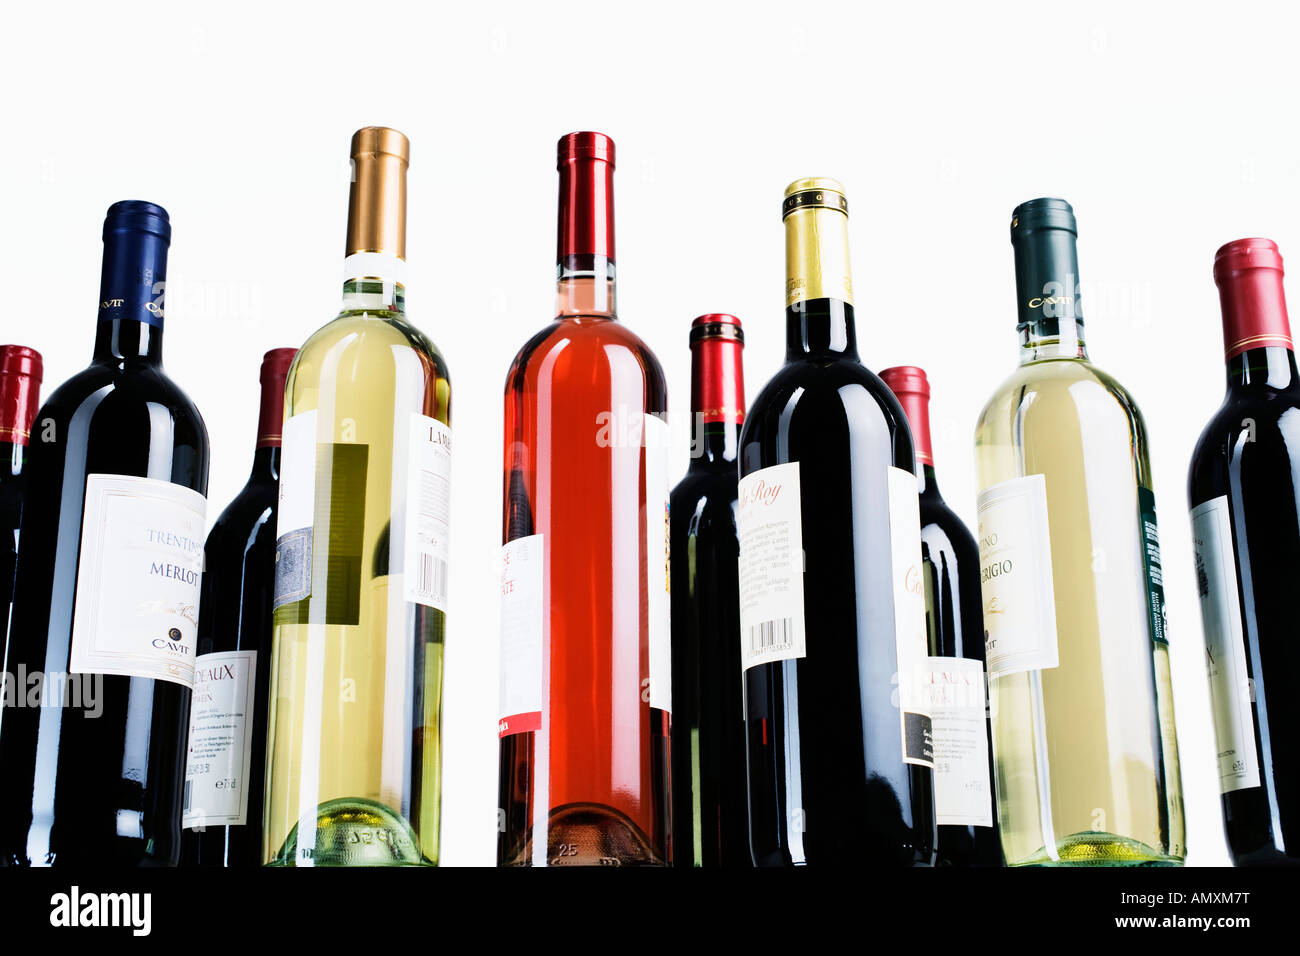 Close-up of bottles of wine Stock Photo